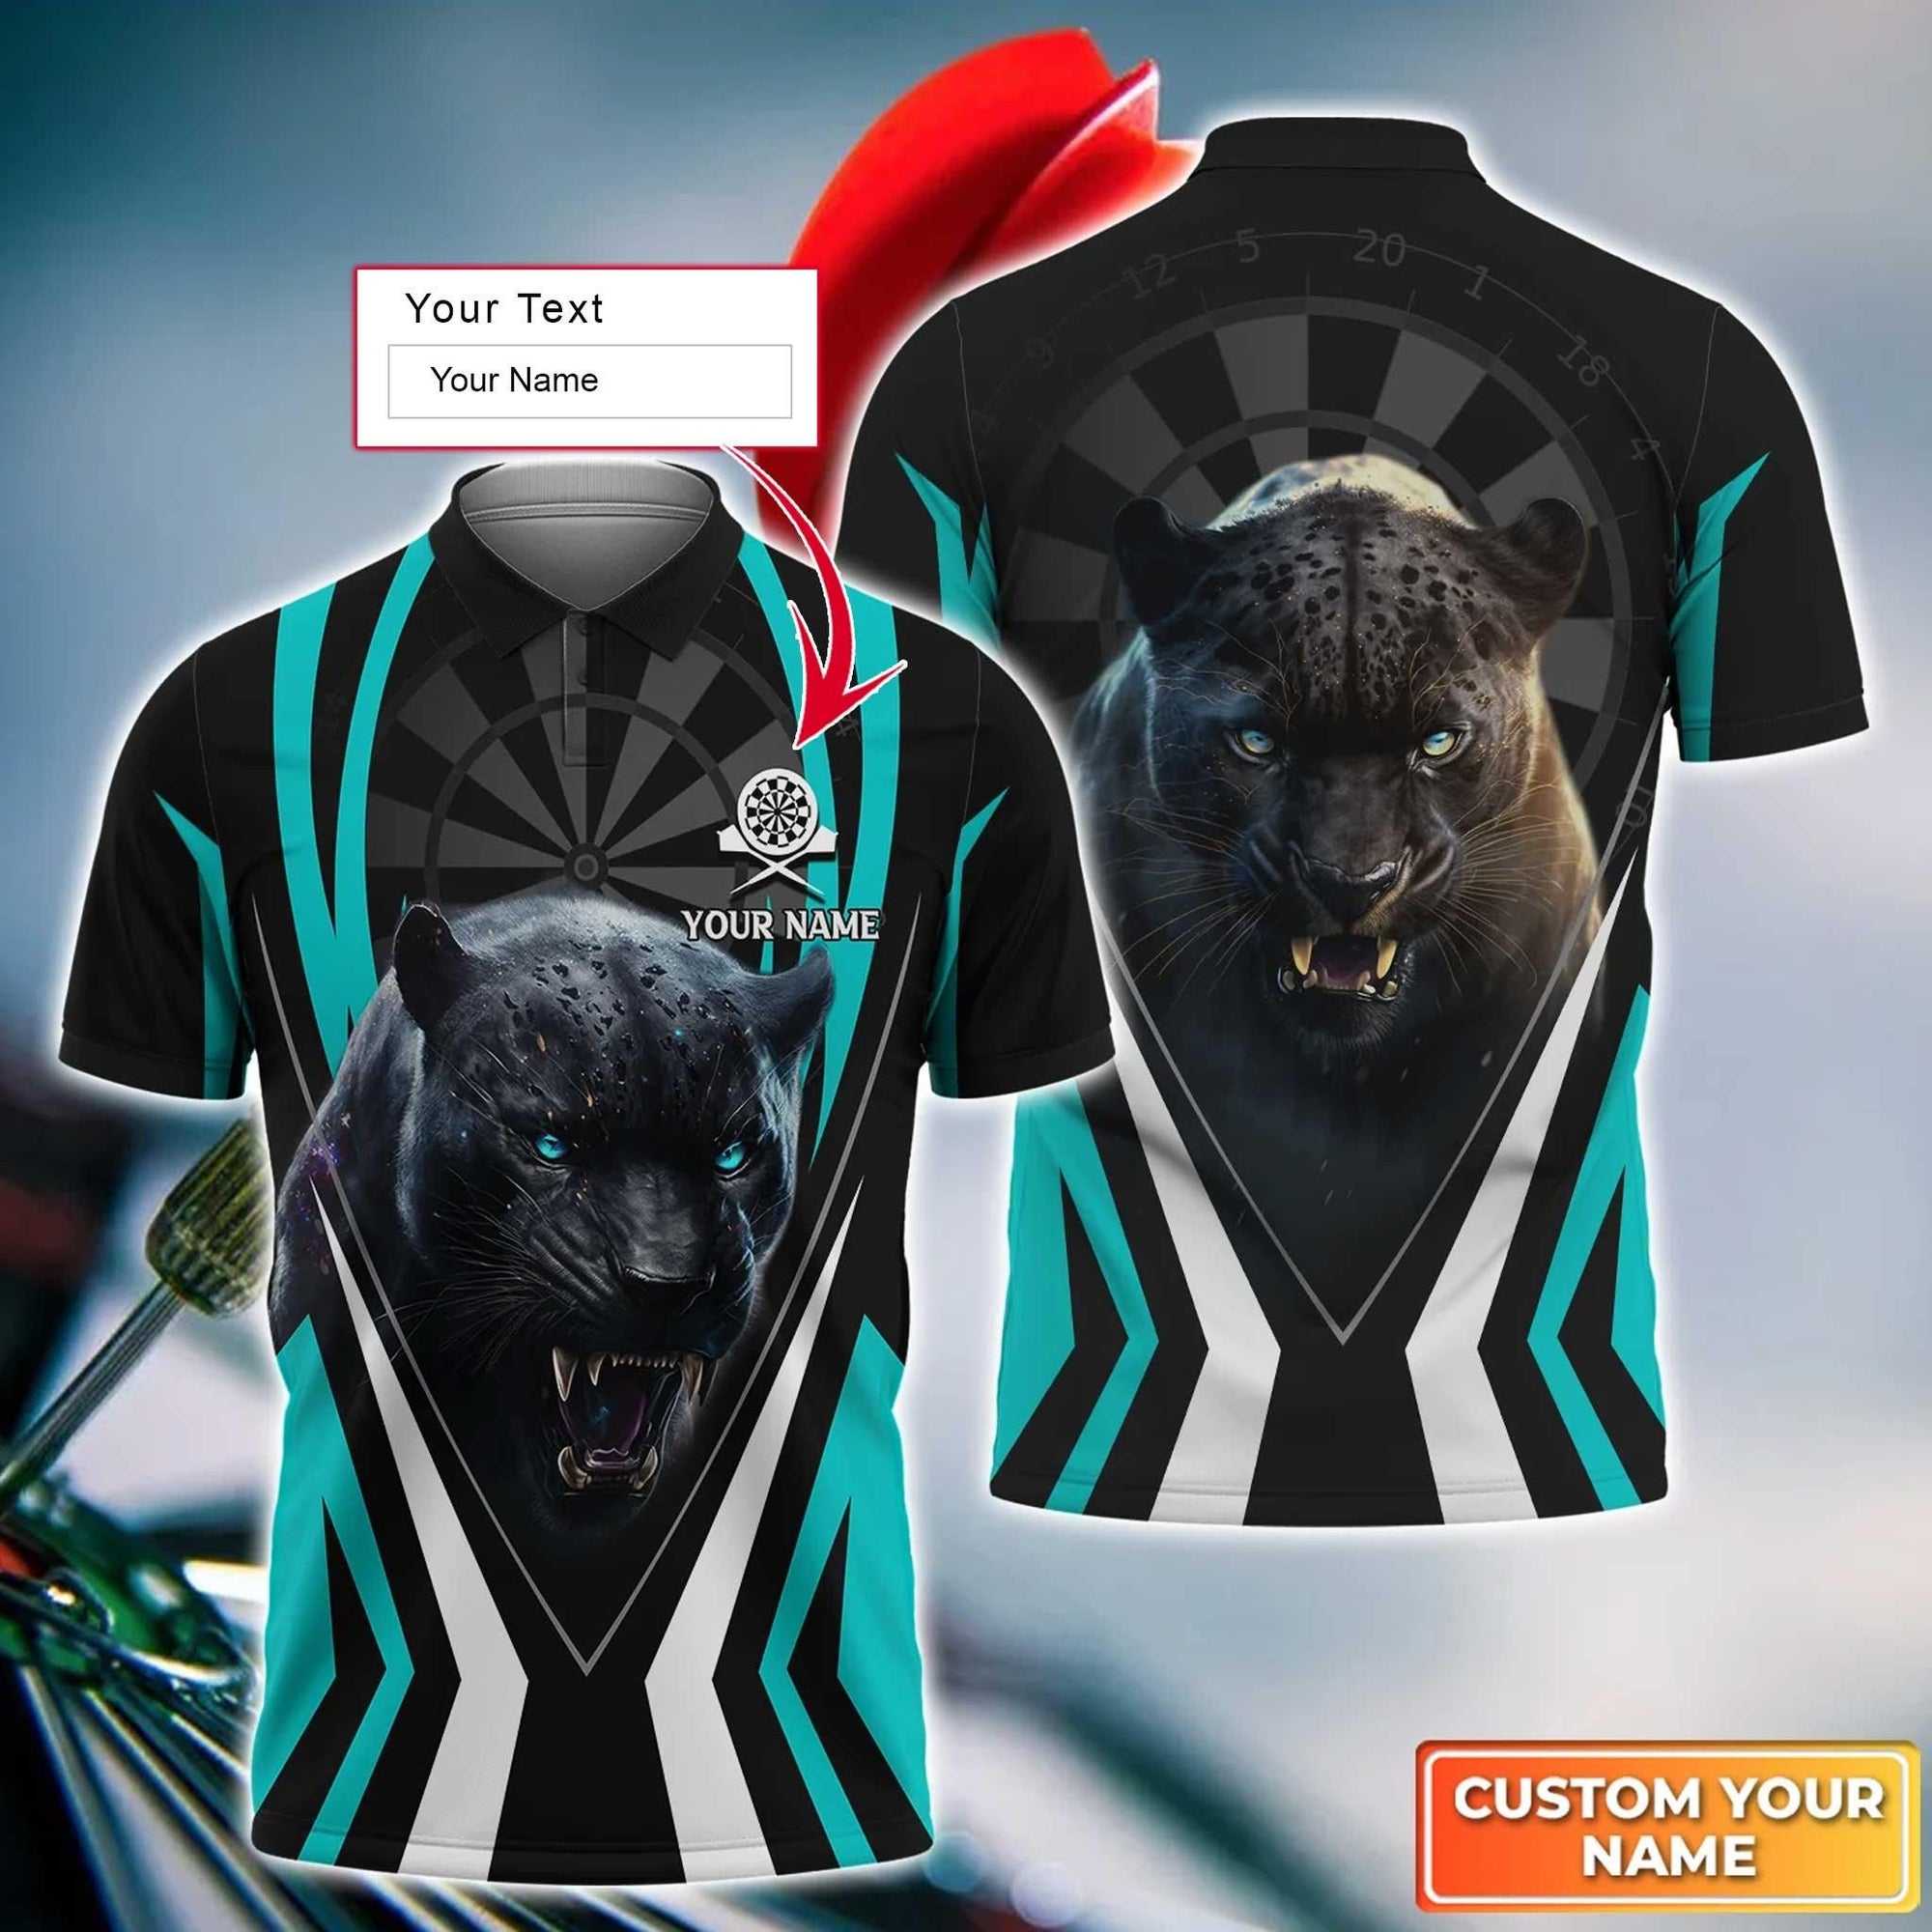 Black Panther And Darts Custom Name Men Polo Shirt, Bullseye Dartboard Personalized Polo Shirt Gift For Darts Lovers, Friends, Team